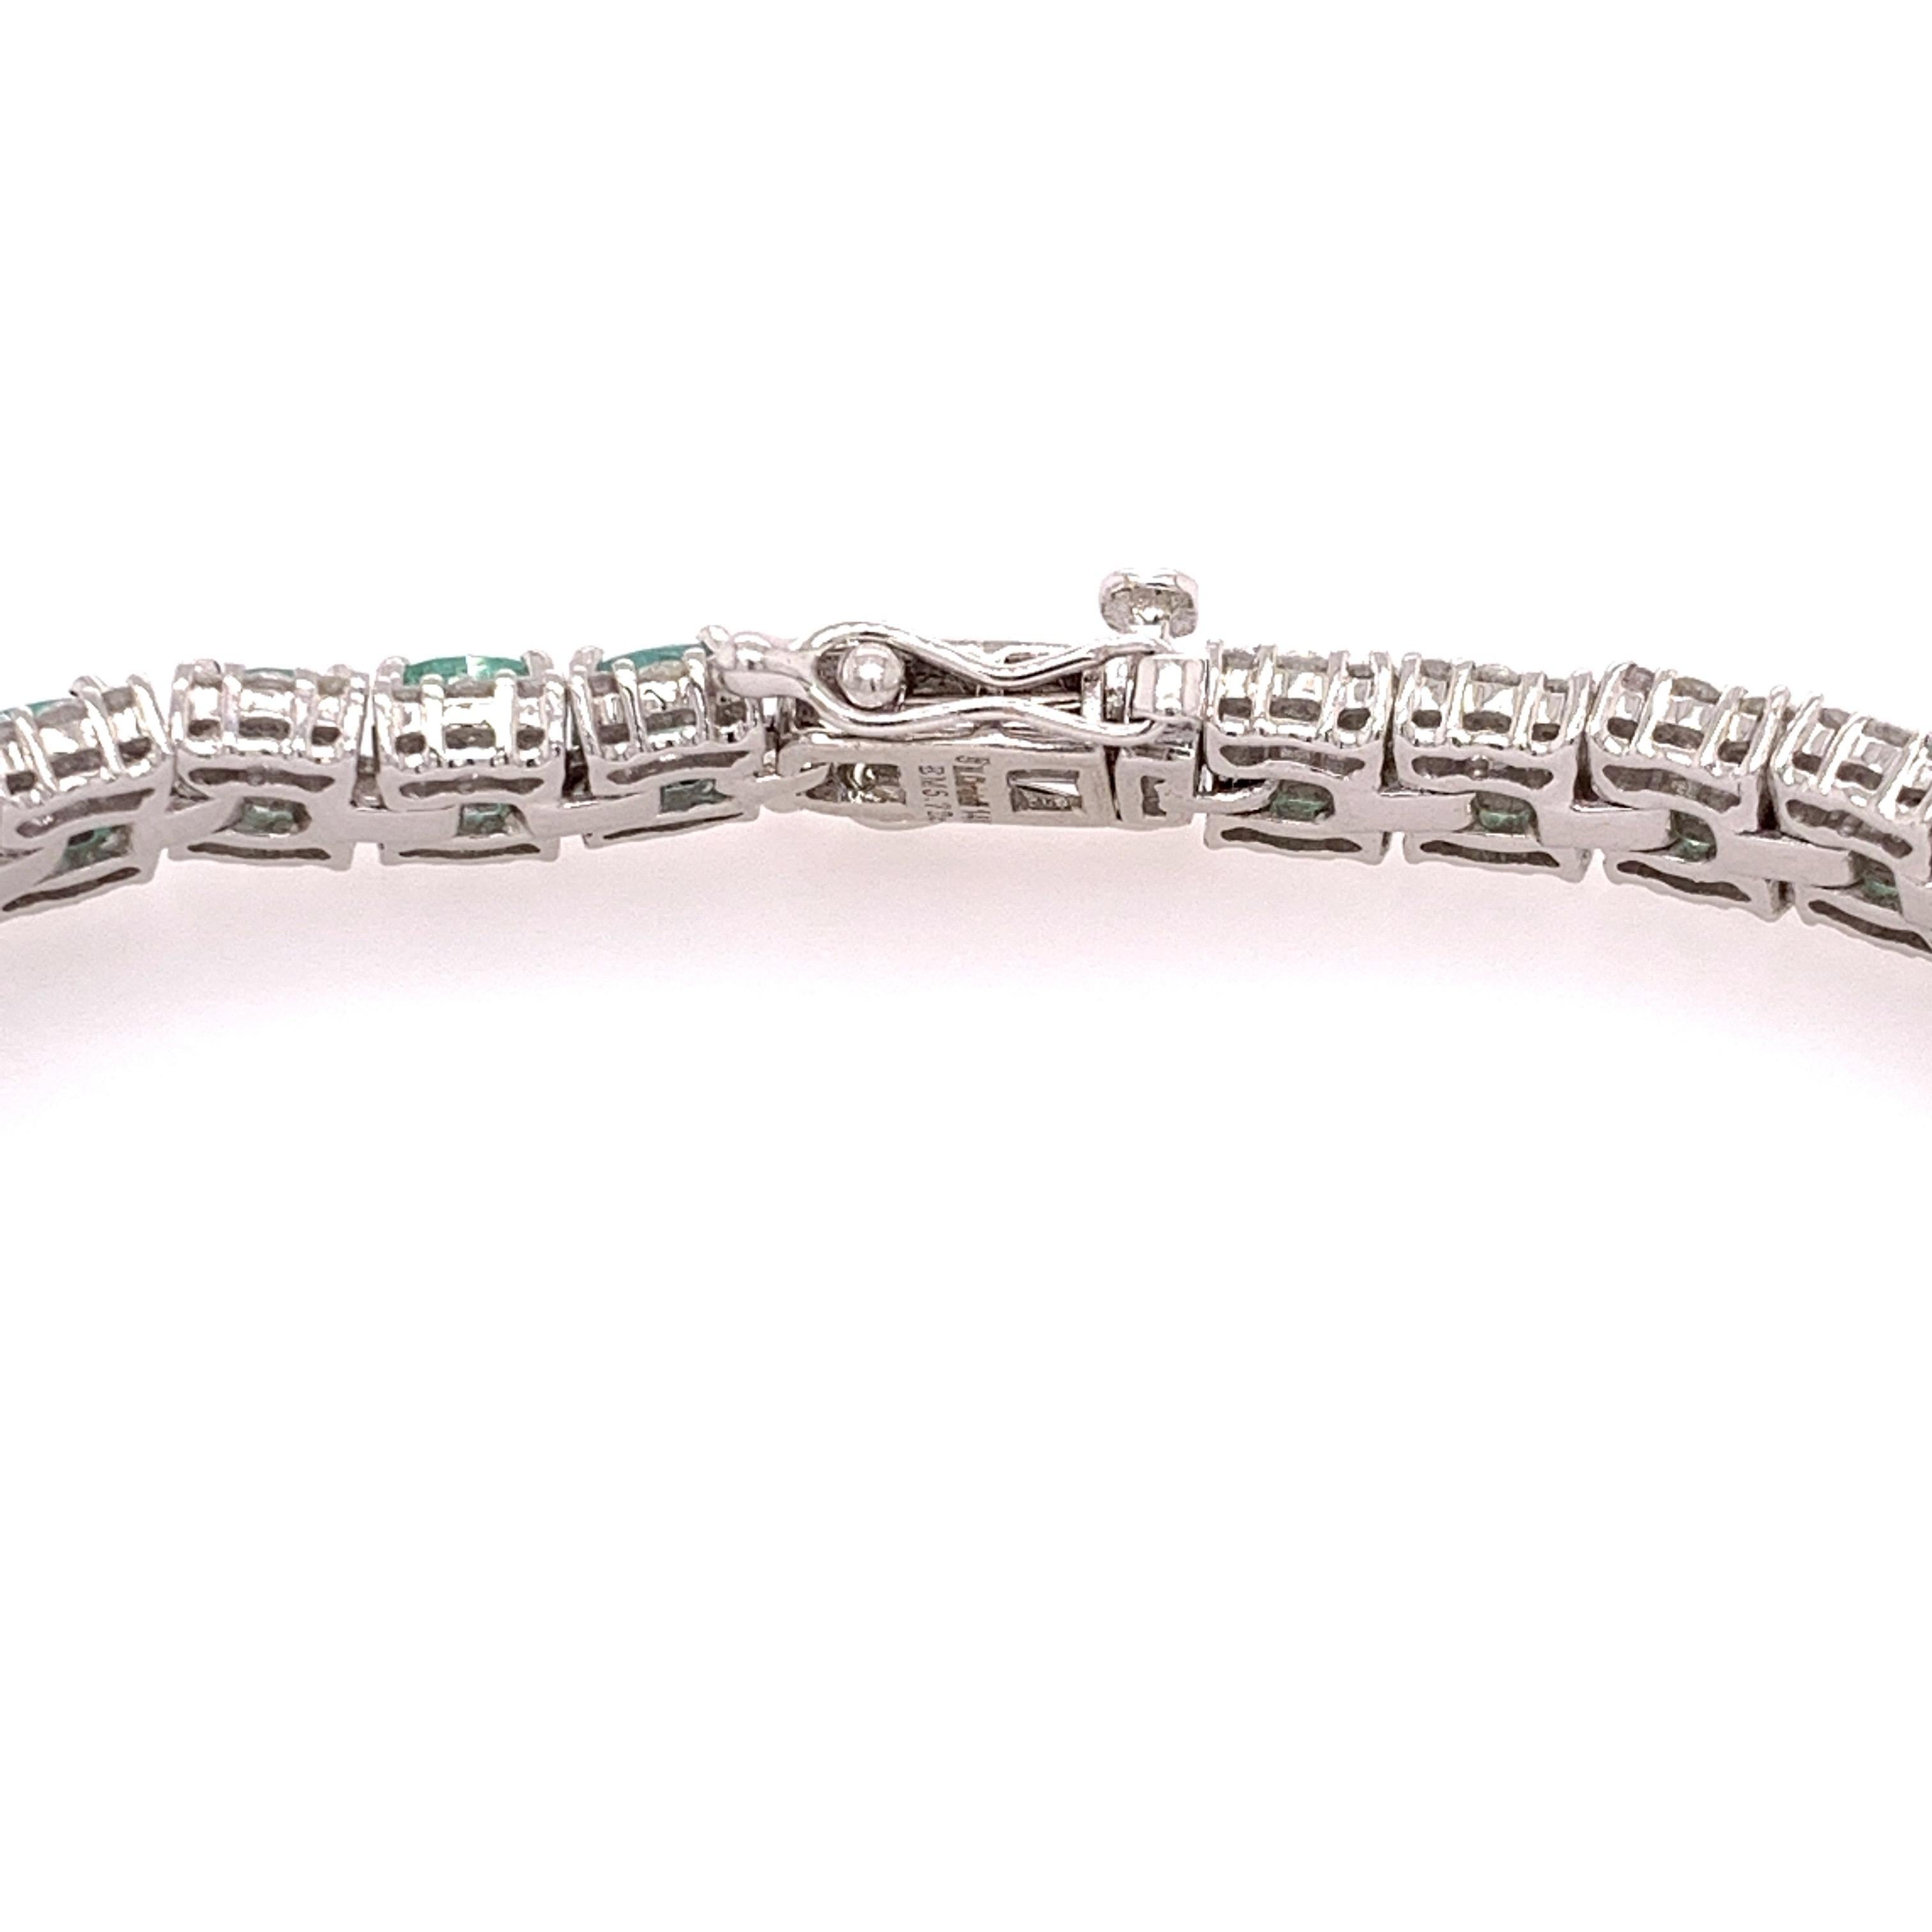 Elegant emerald diamond tennis bracelet. Lively medium green colour with lustre, oval faceted, 5.72 carats natural emerald mounted in an open basket with four bead prongs, accented with two rows of round brilliant cut diamonds. Handcrafted flexible